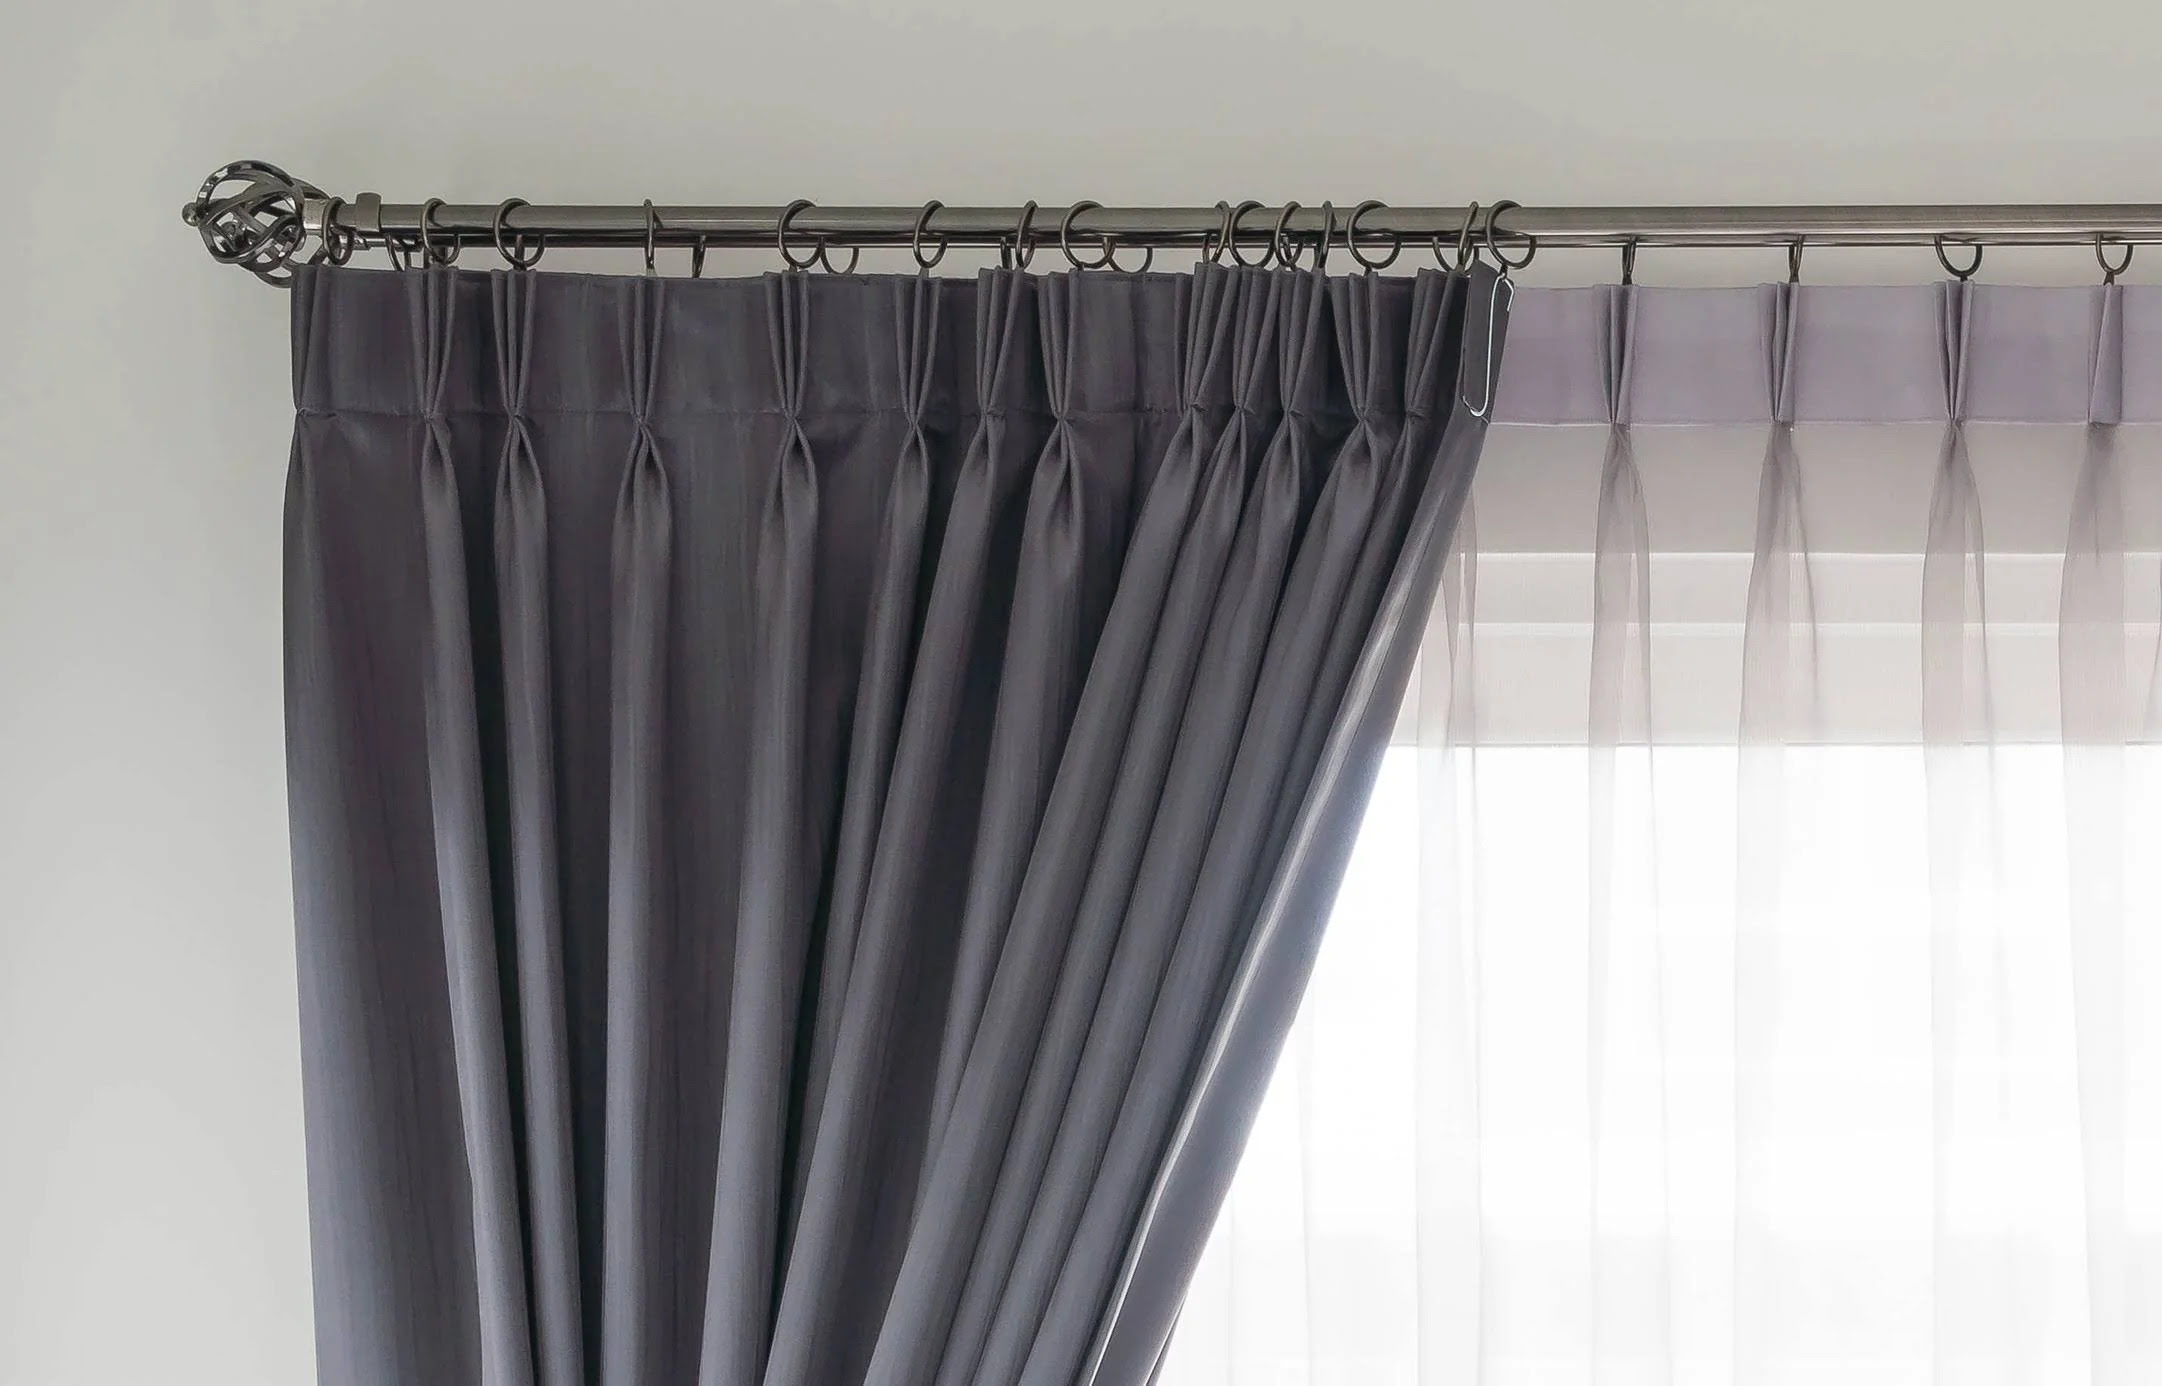 How To Make Curtains Slide Easily